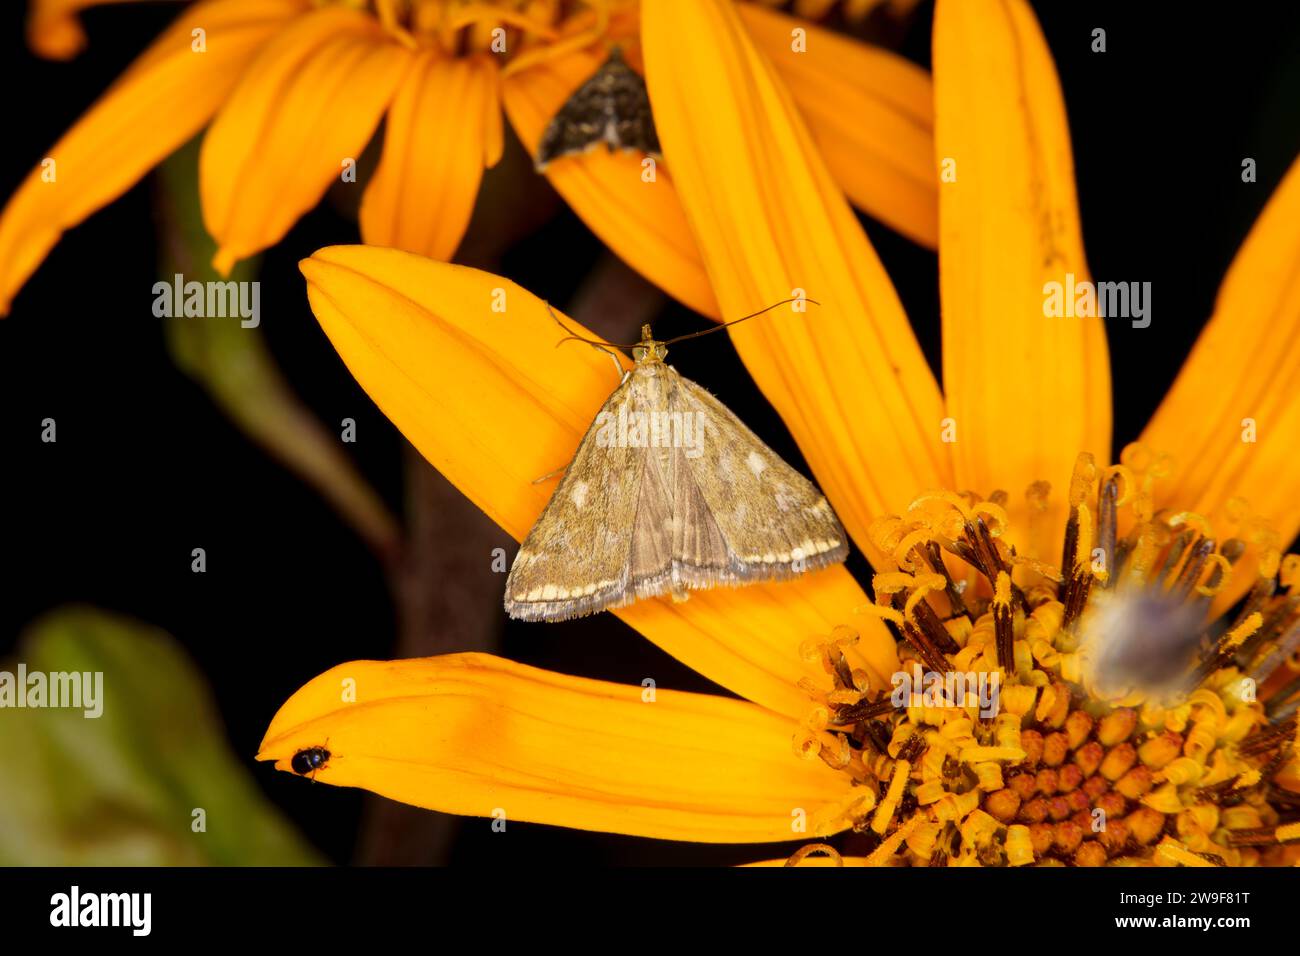 Loxostege sticticalis Family Crambidae Genus Loxostege Beet webworm moth wild nature insect wallpaper, picture, photography Stock Photo